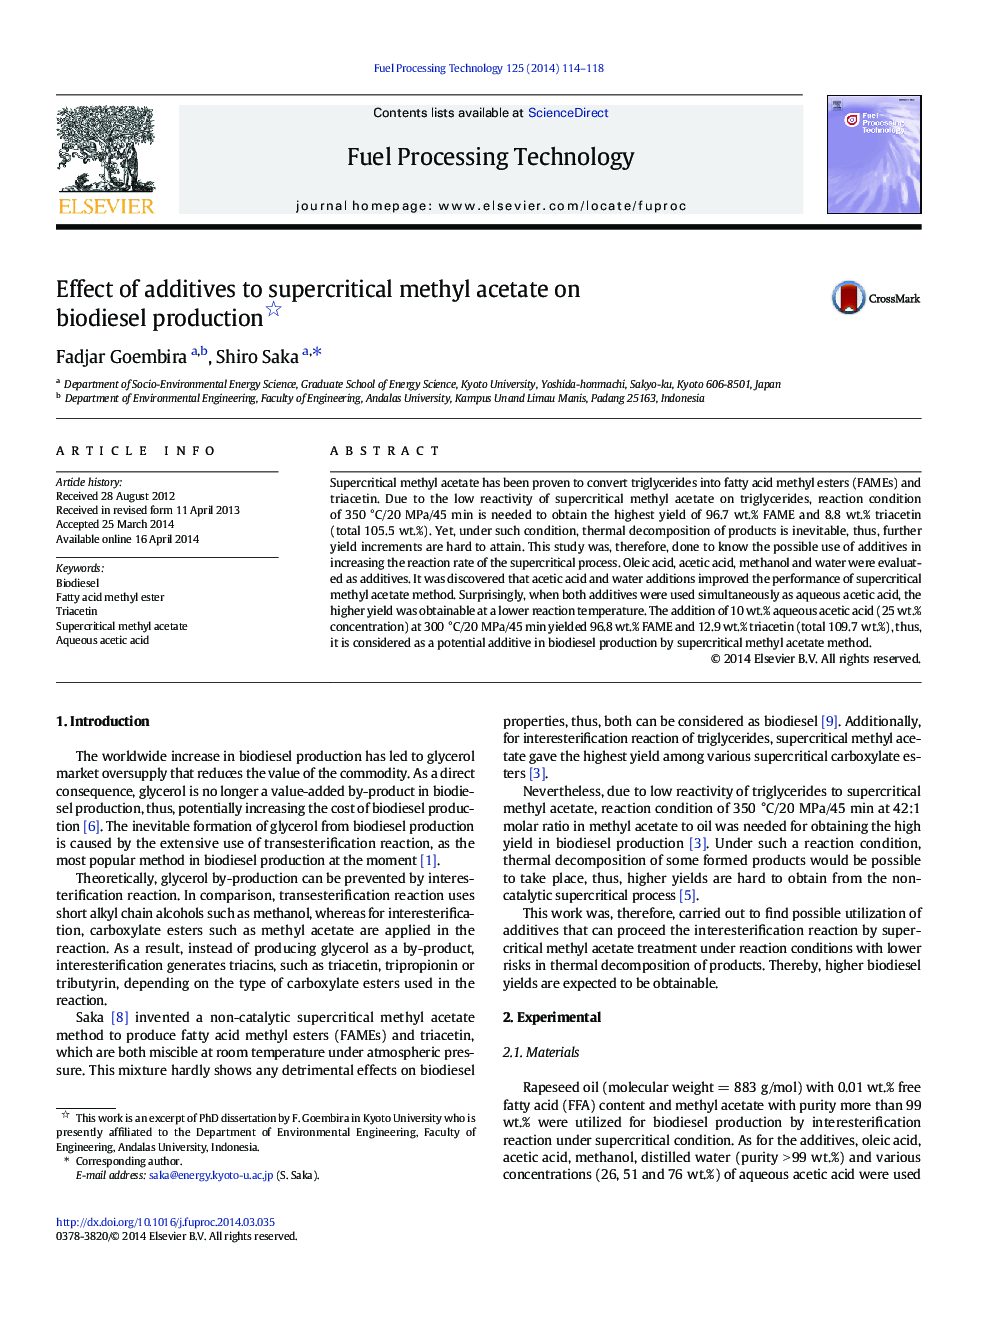 Effect of additives to supercritical methyl acetate on biodiesel production 